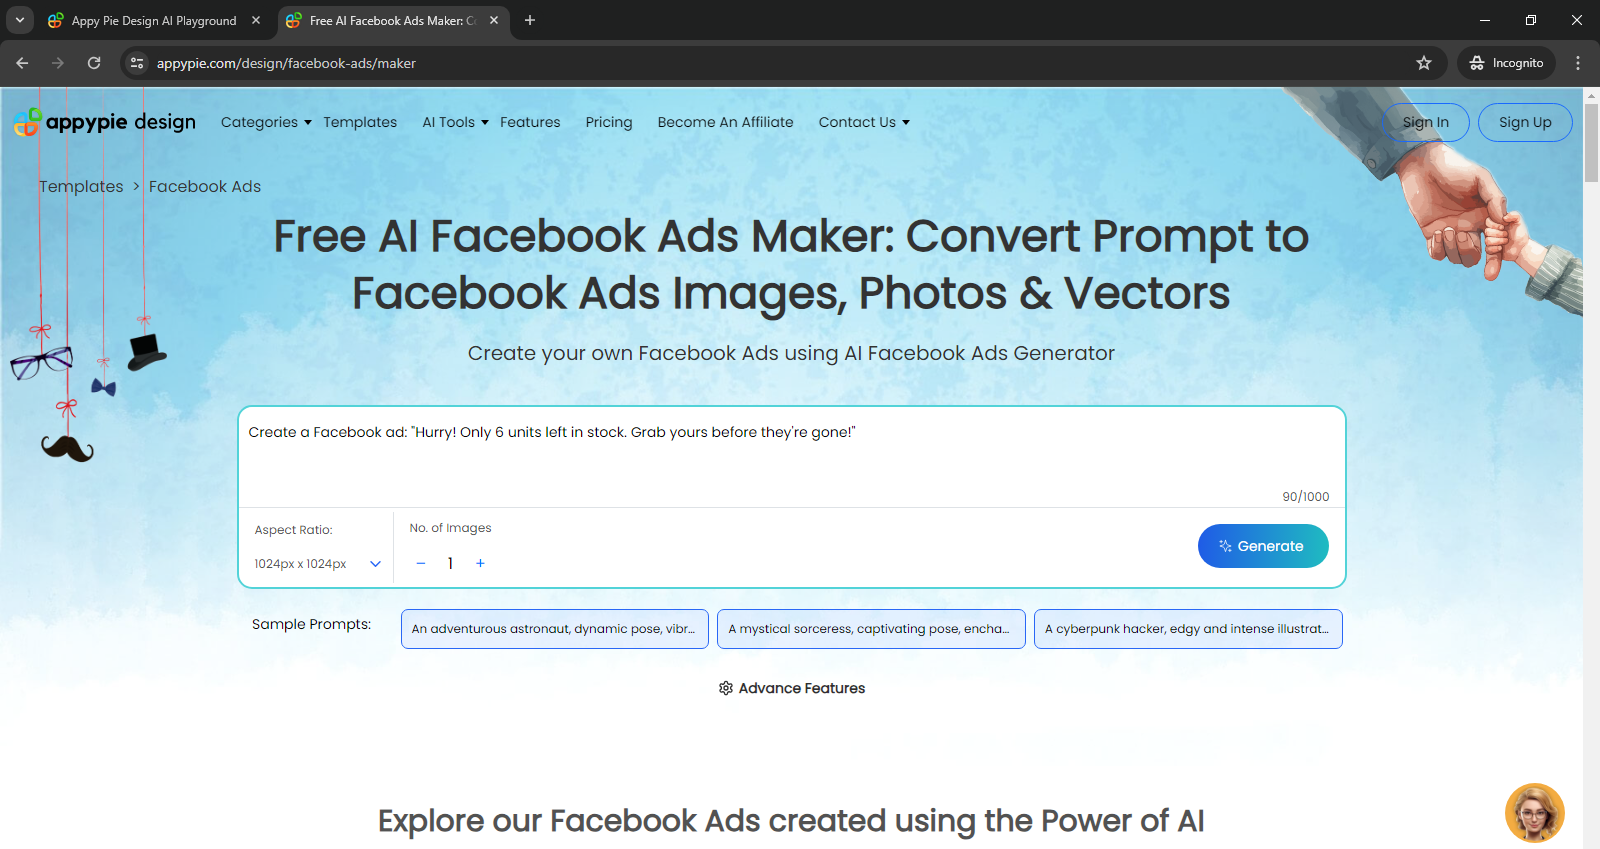 Prompts to Facebook Ads